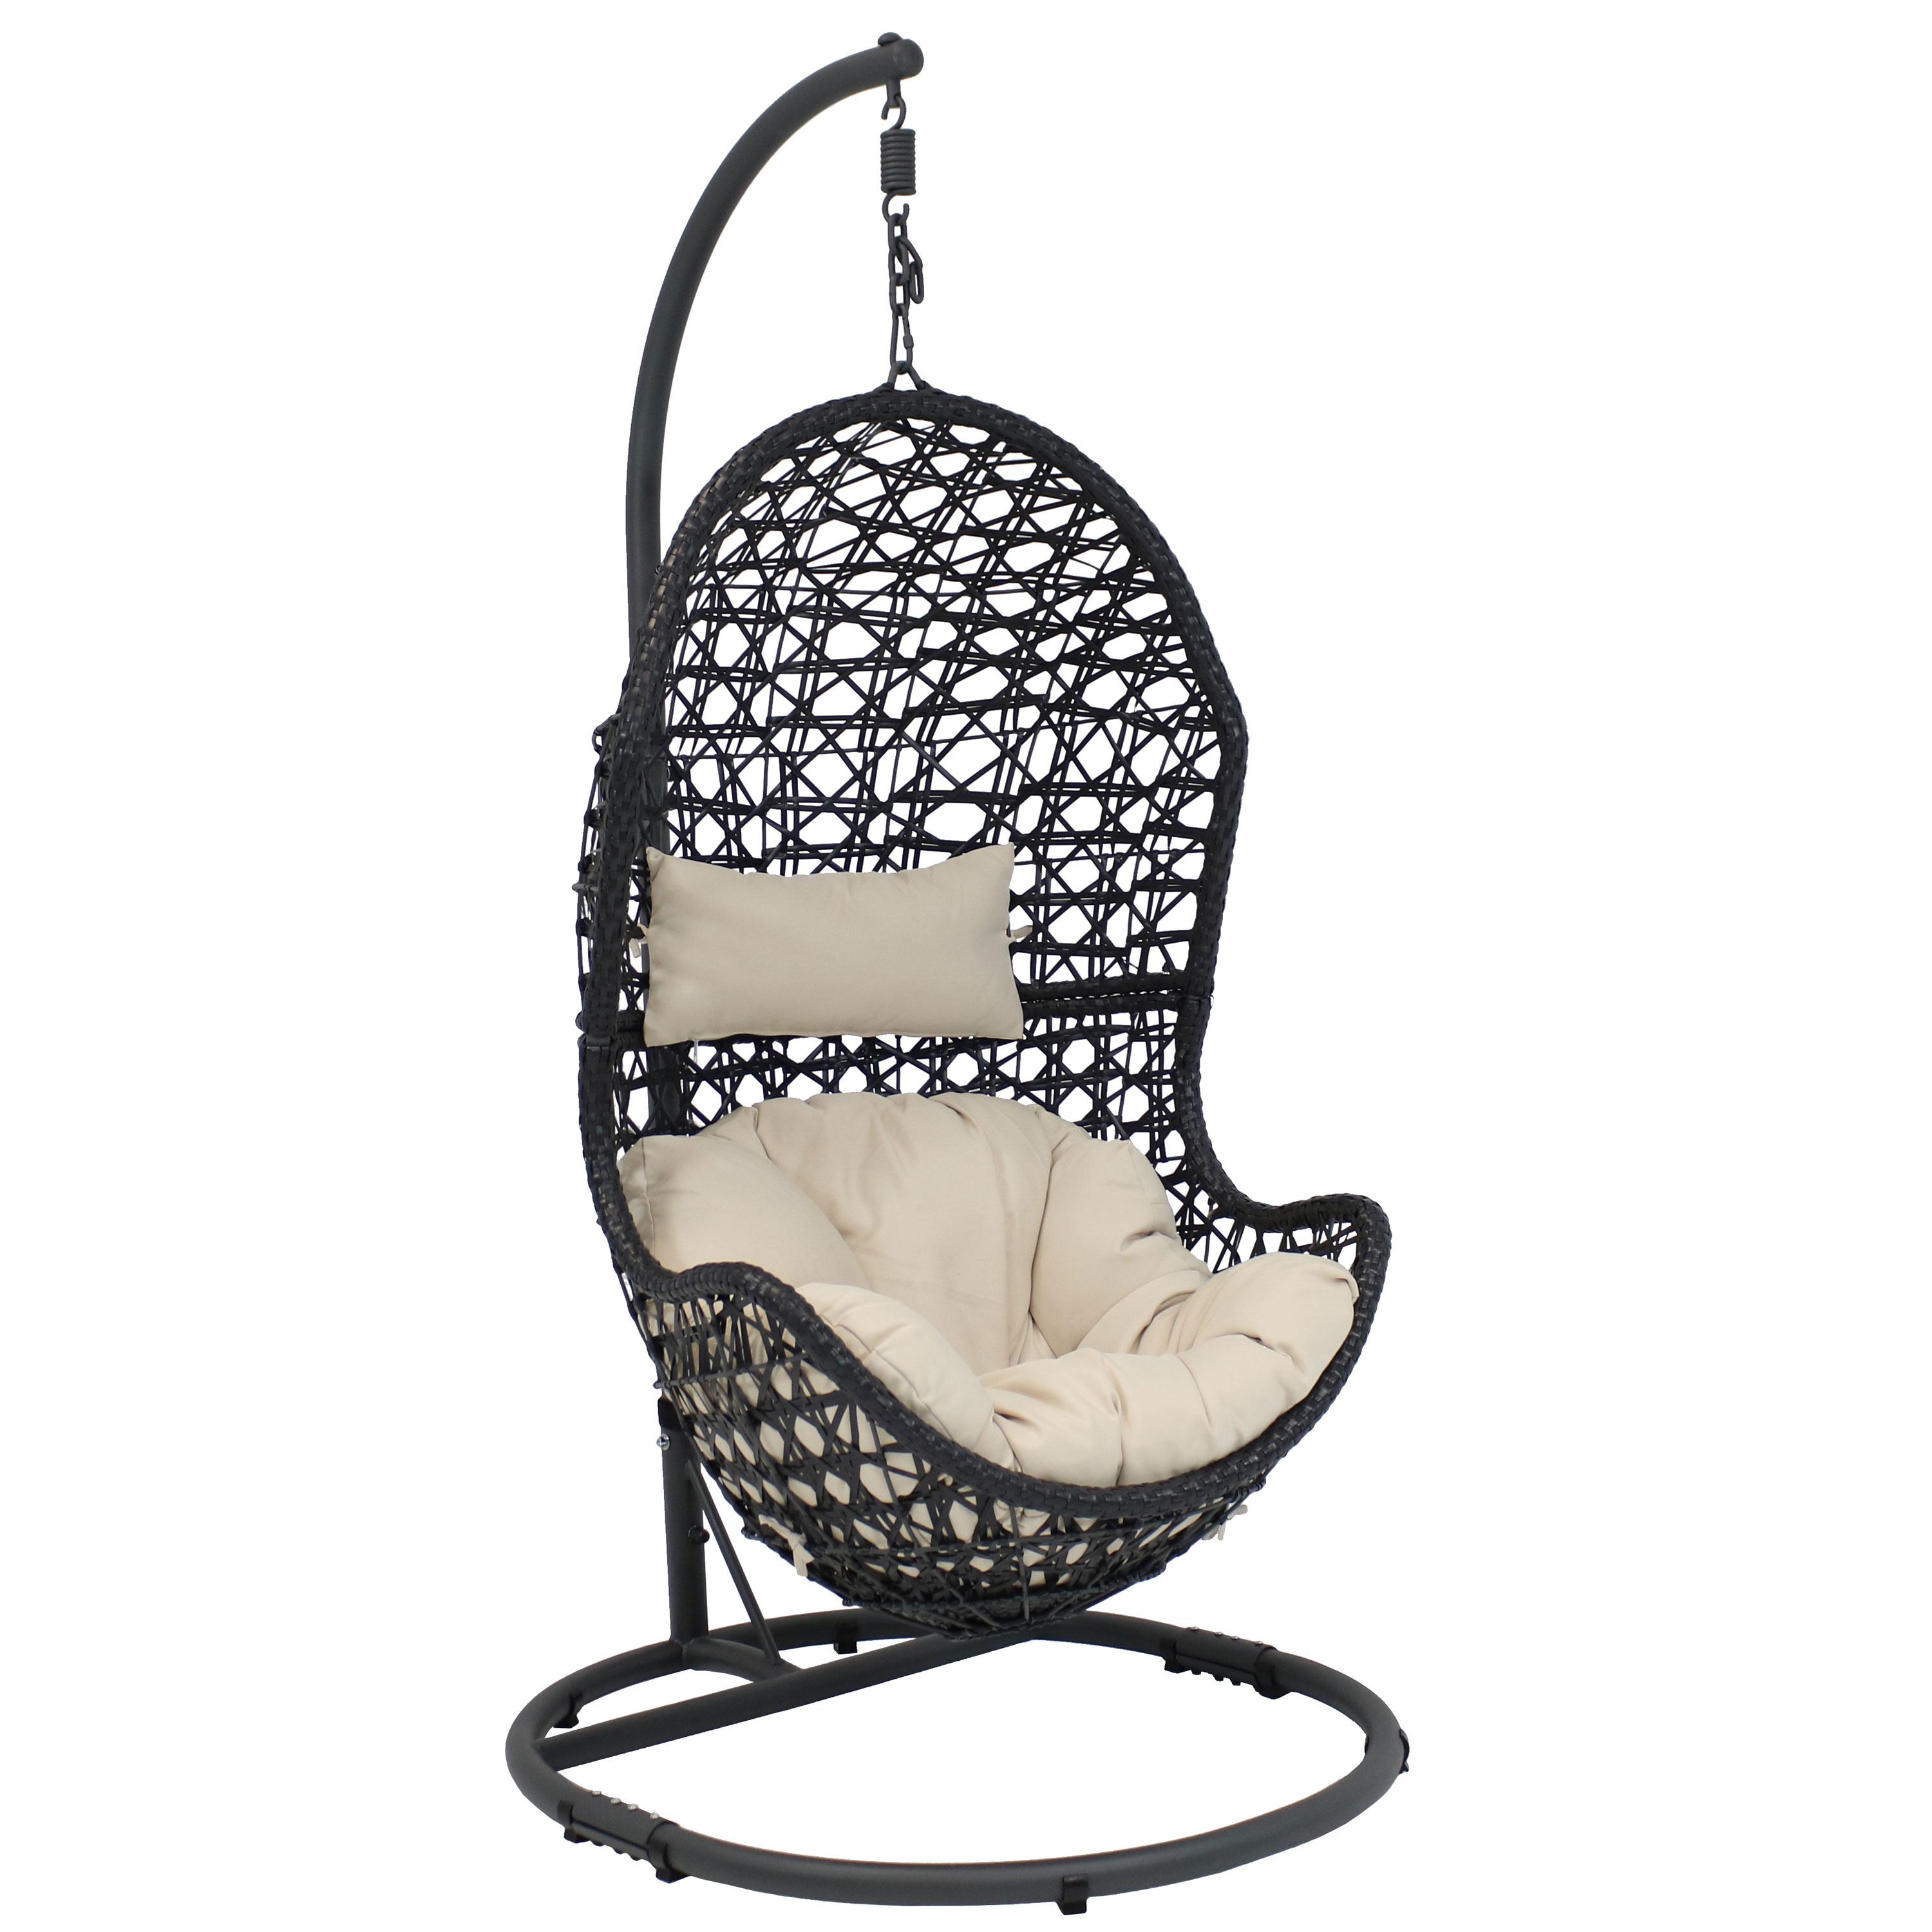 Sunnydaze Cordelia Hanging Egg Chair with Steel Stand Set, Resin Wicker, Large Basket Design, Outdoor Use, Includes Cushion, Beige